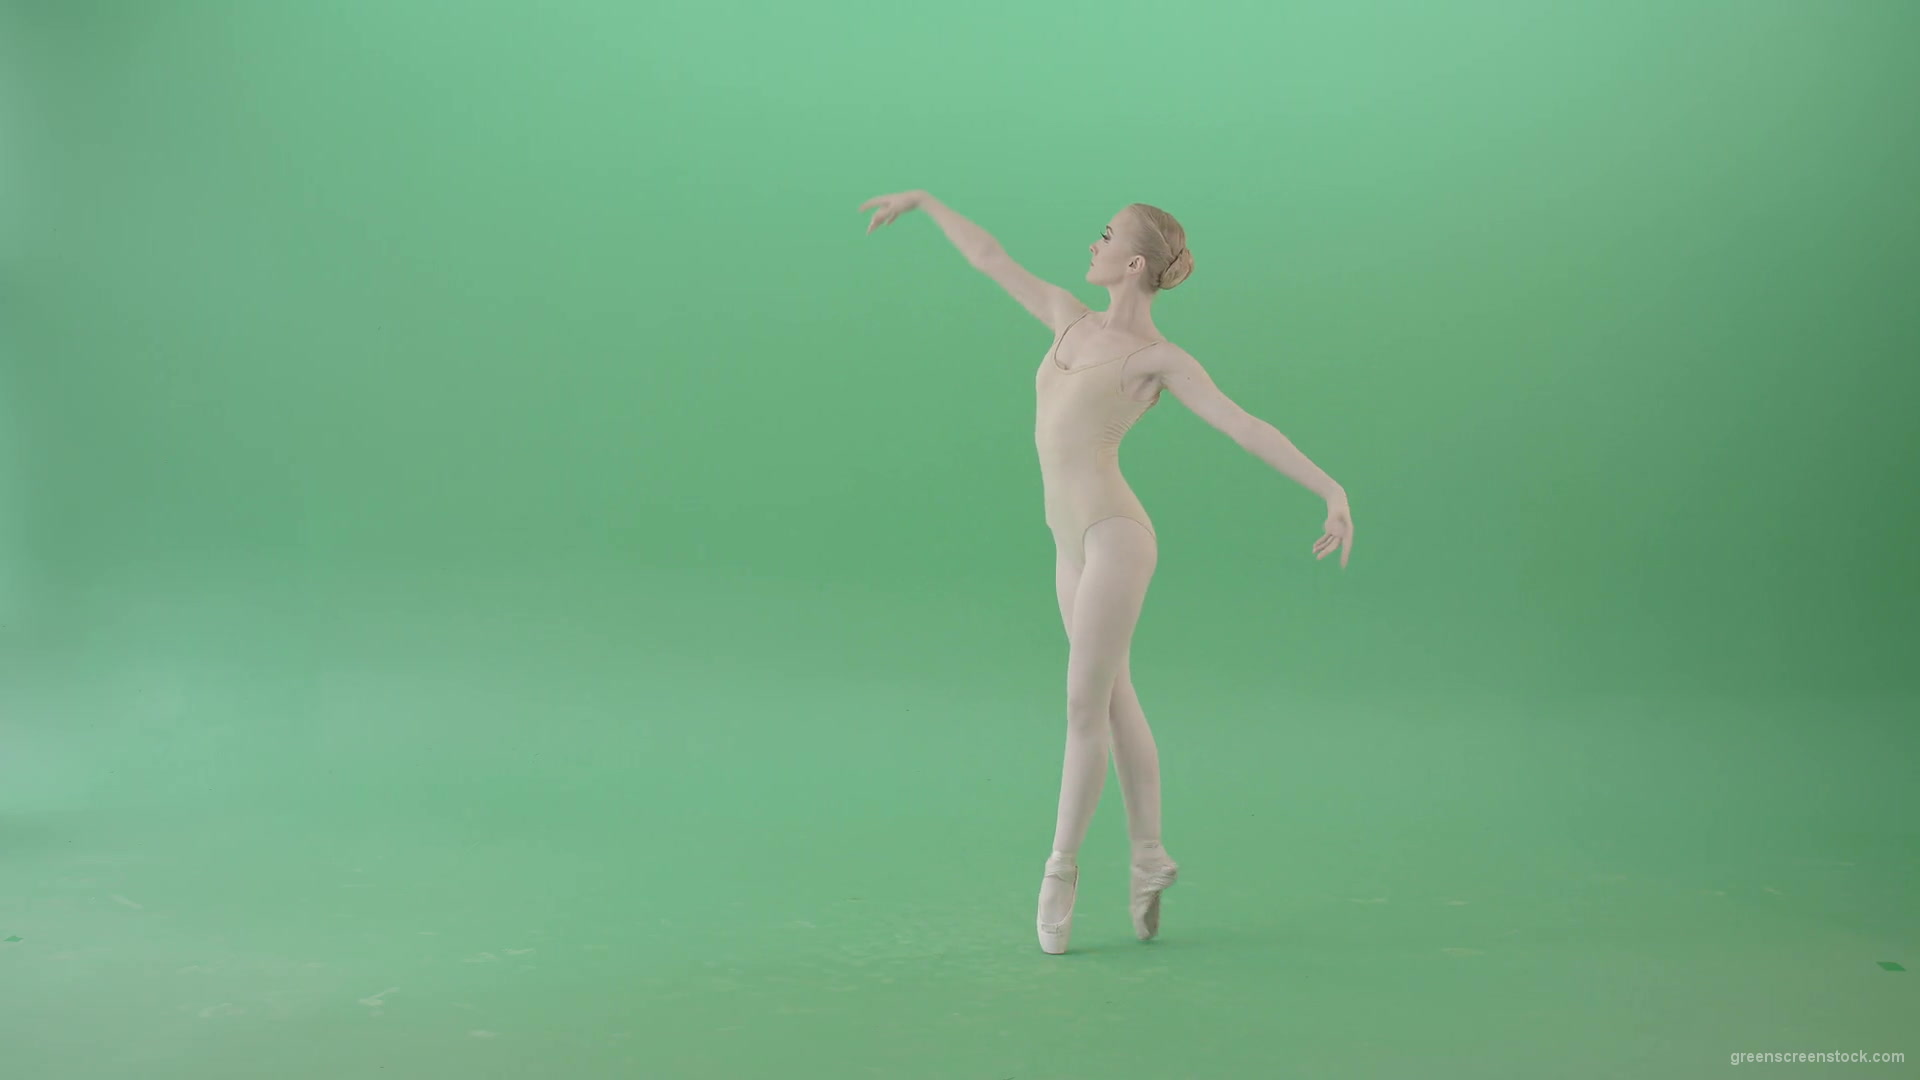 Classical-Ballet-Art-dancing-girl-in-body-skin-wear-chill-in-practice-isolated-on-green-screen-4K-Video-Footage-1920_005 Green Screen Stock